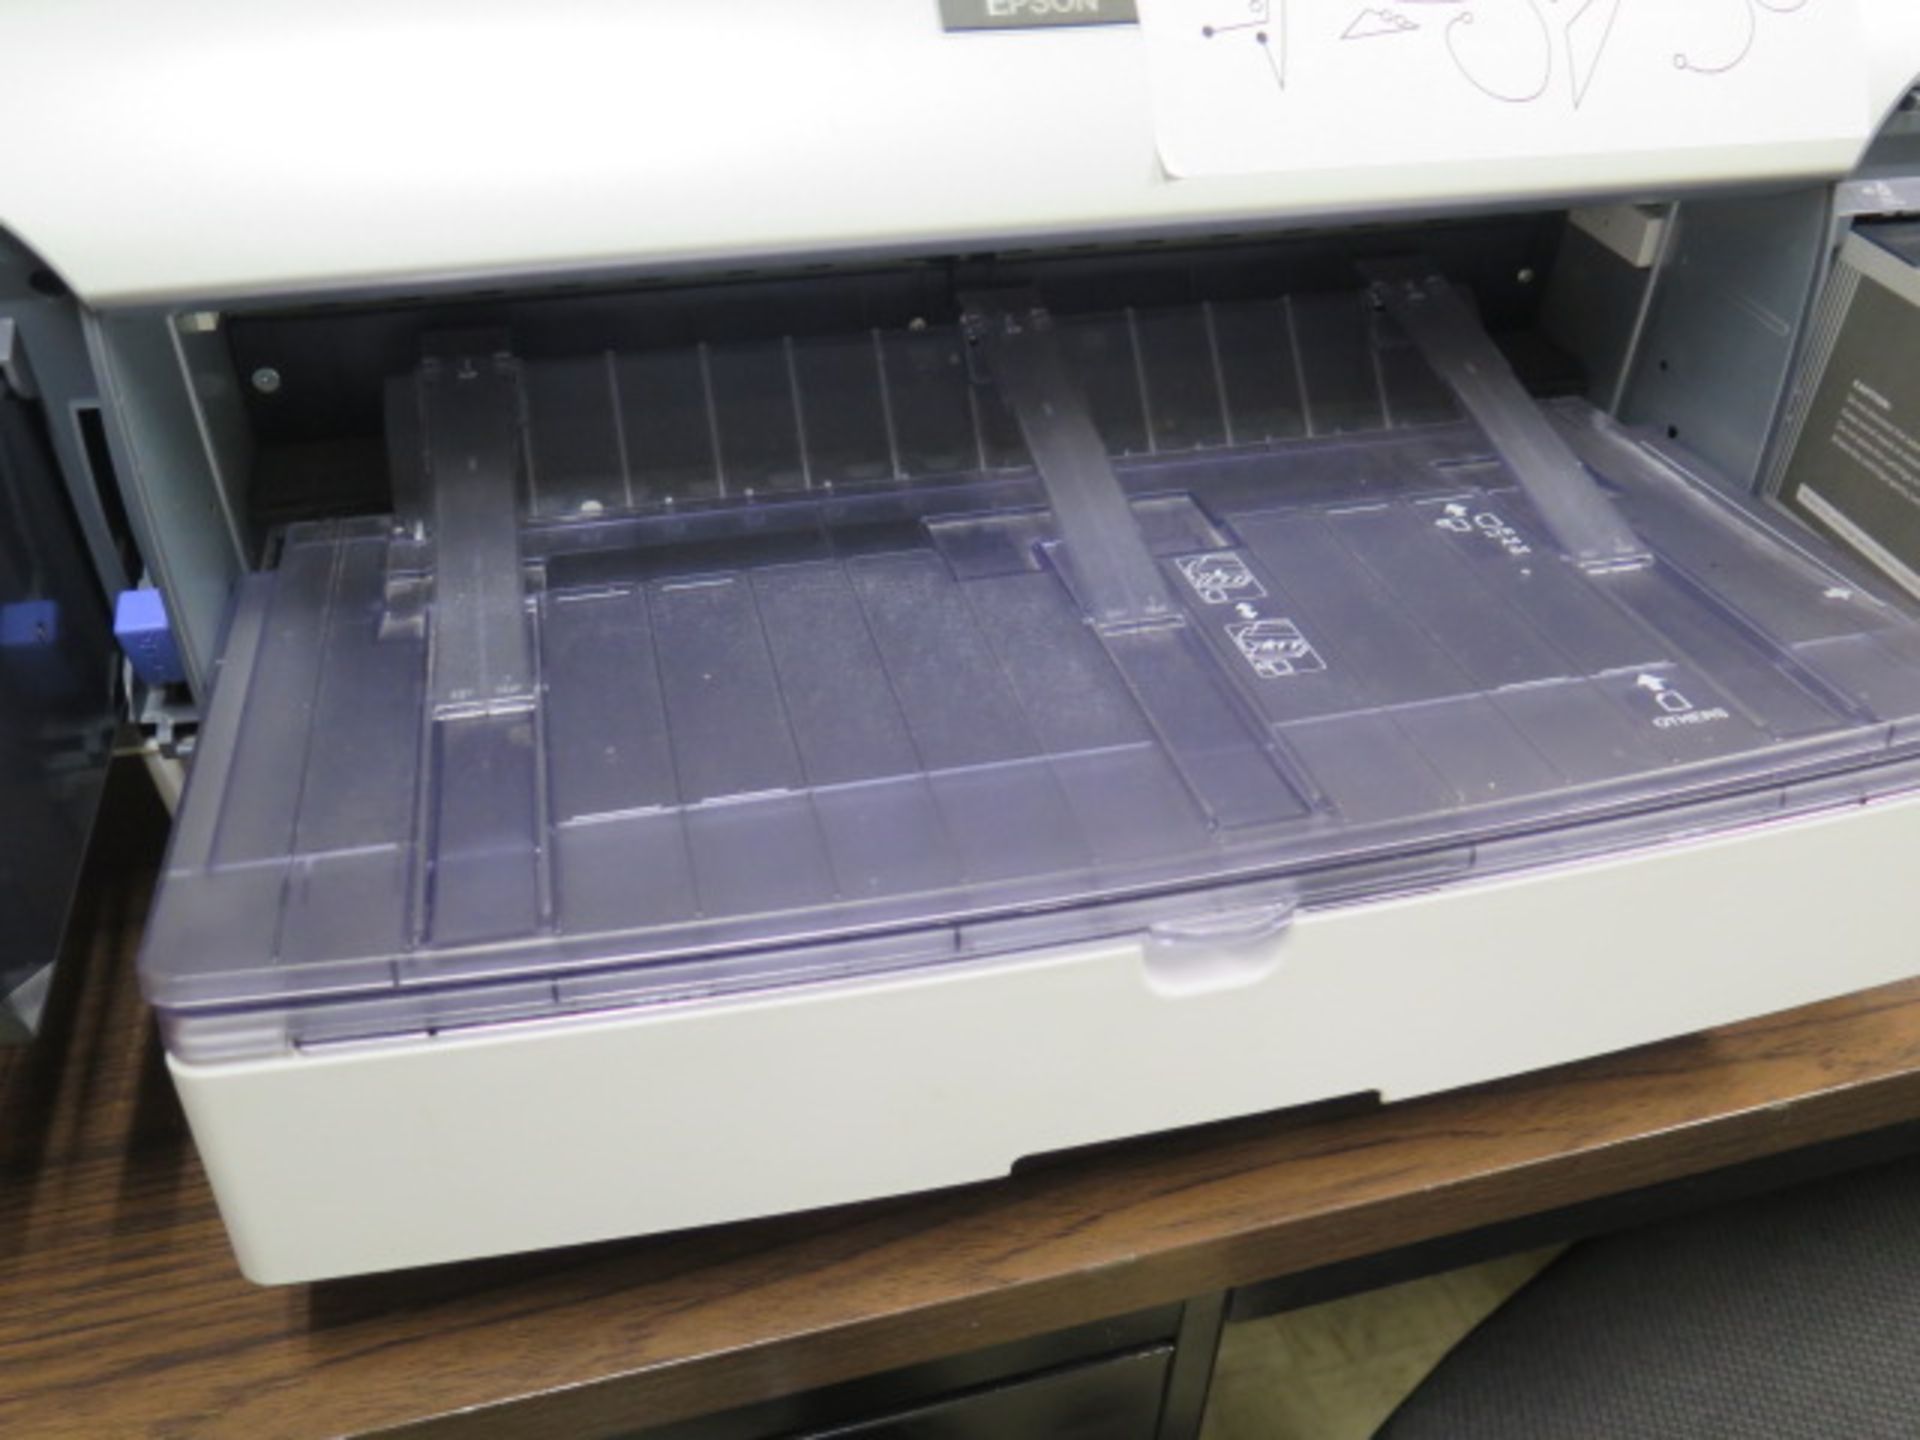 Epson Stylus Pro 4800 17" Wide Format Color Printer / Plotter (SOLD AS-IS - NO WARRANTY) - Image 5 of 7